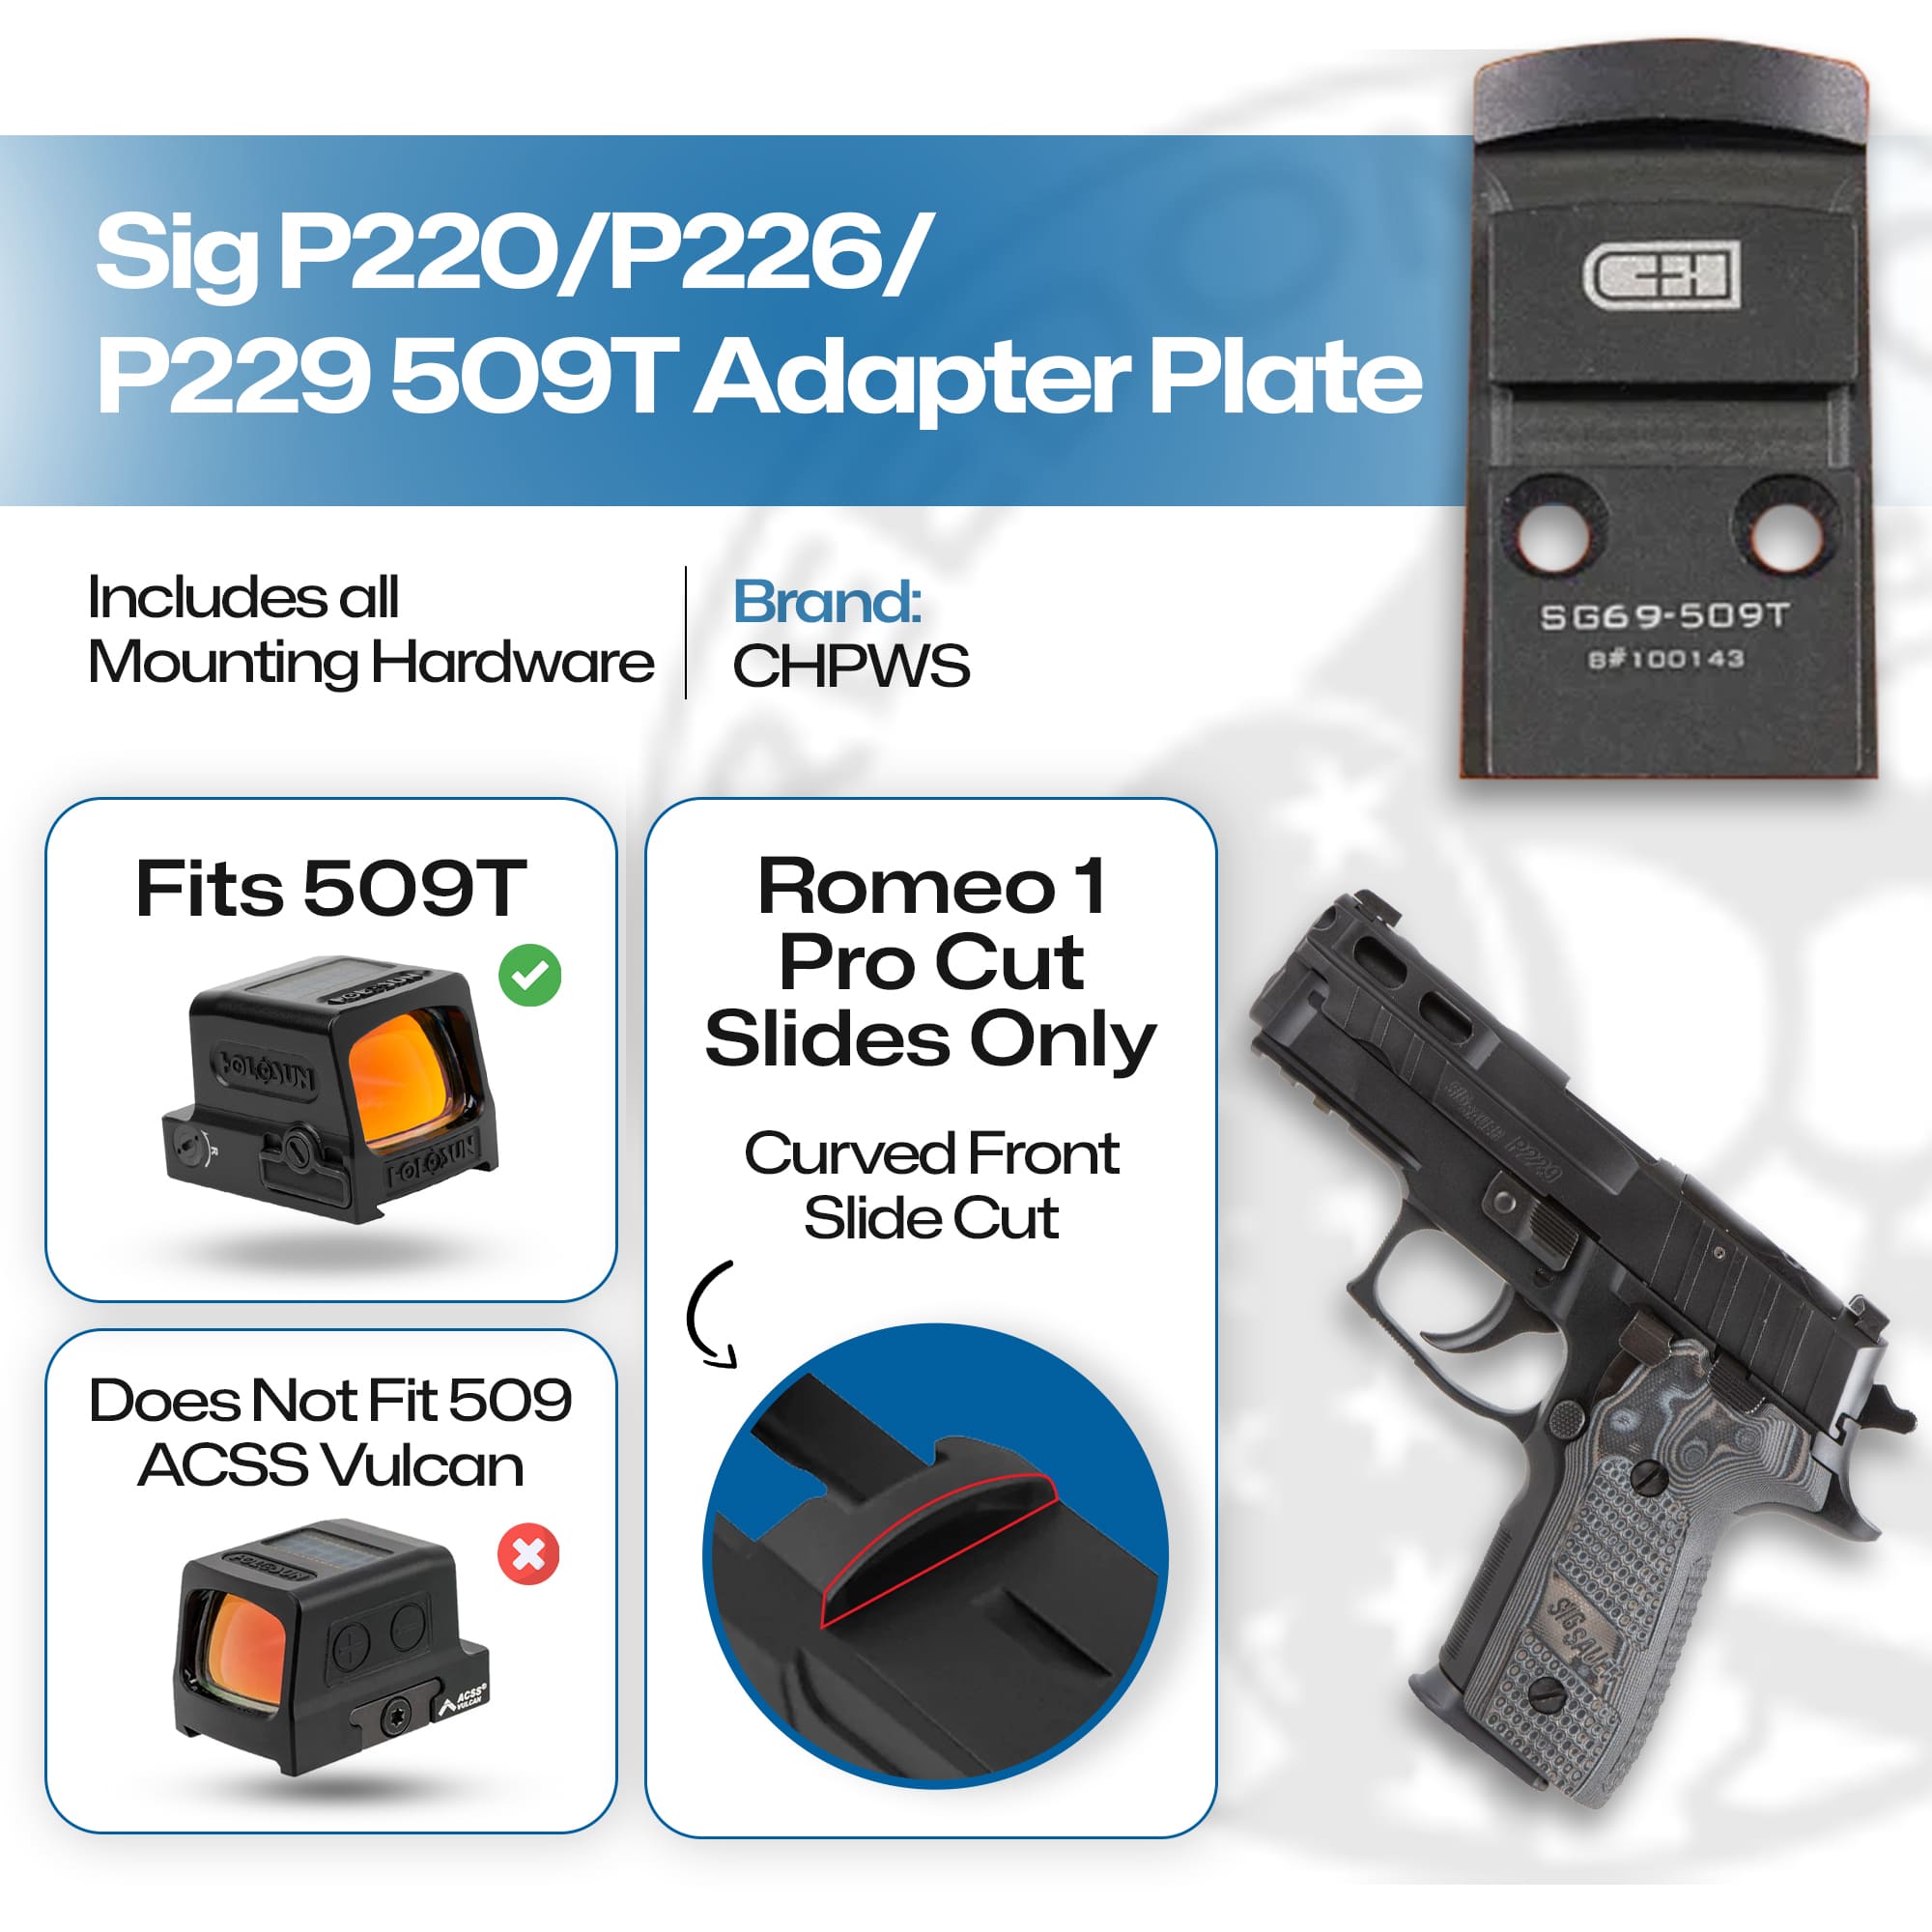 Sig P226/P229 to Holosun 509T for Romeo 1 Pro Cut Slides Only - Adapter Plate CHPWS - SG69-509T